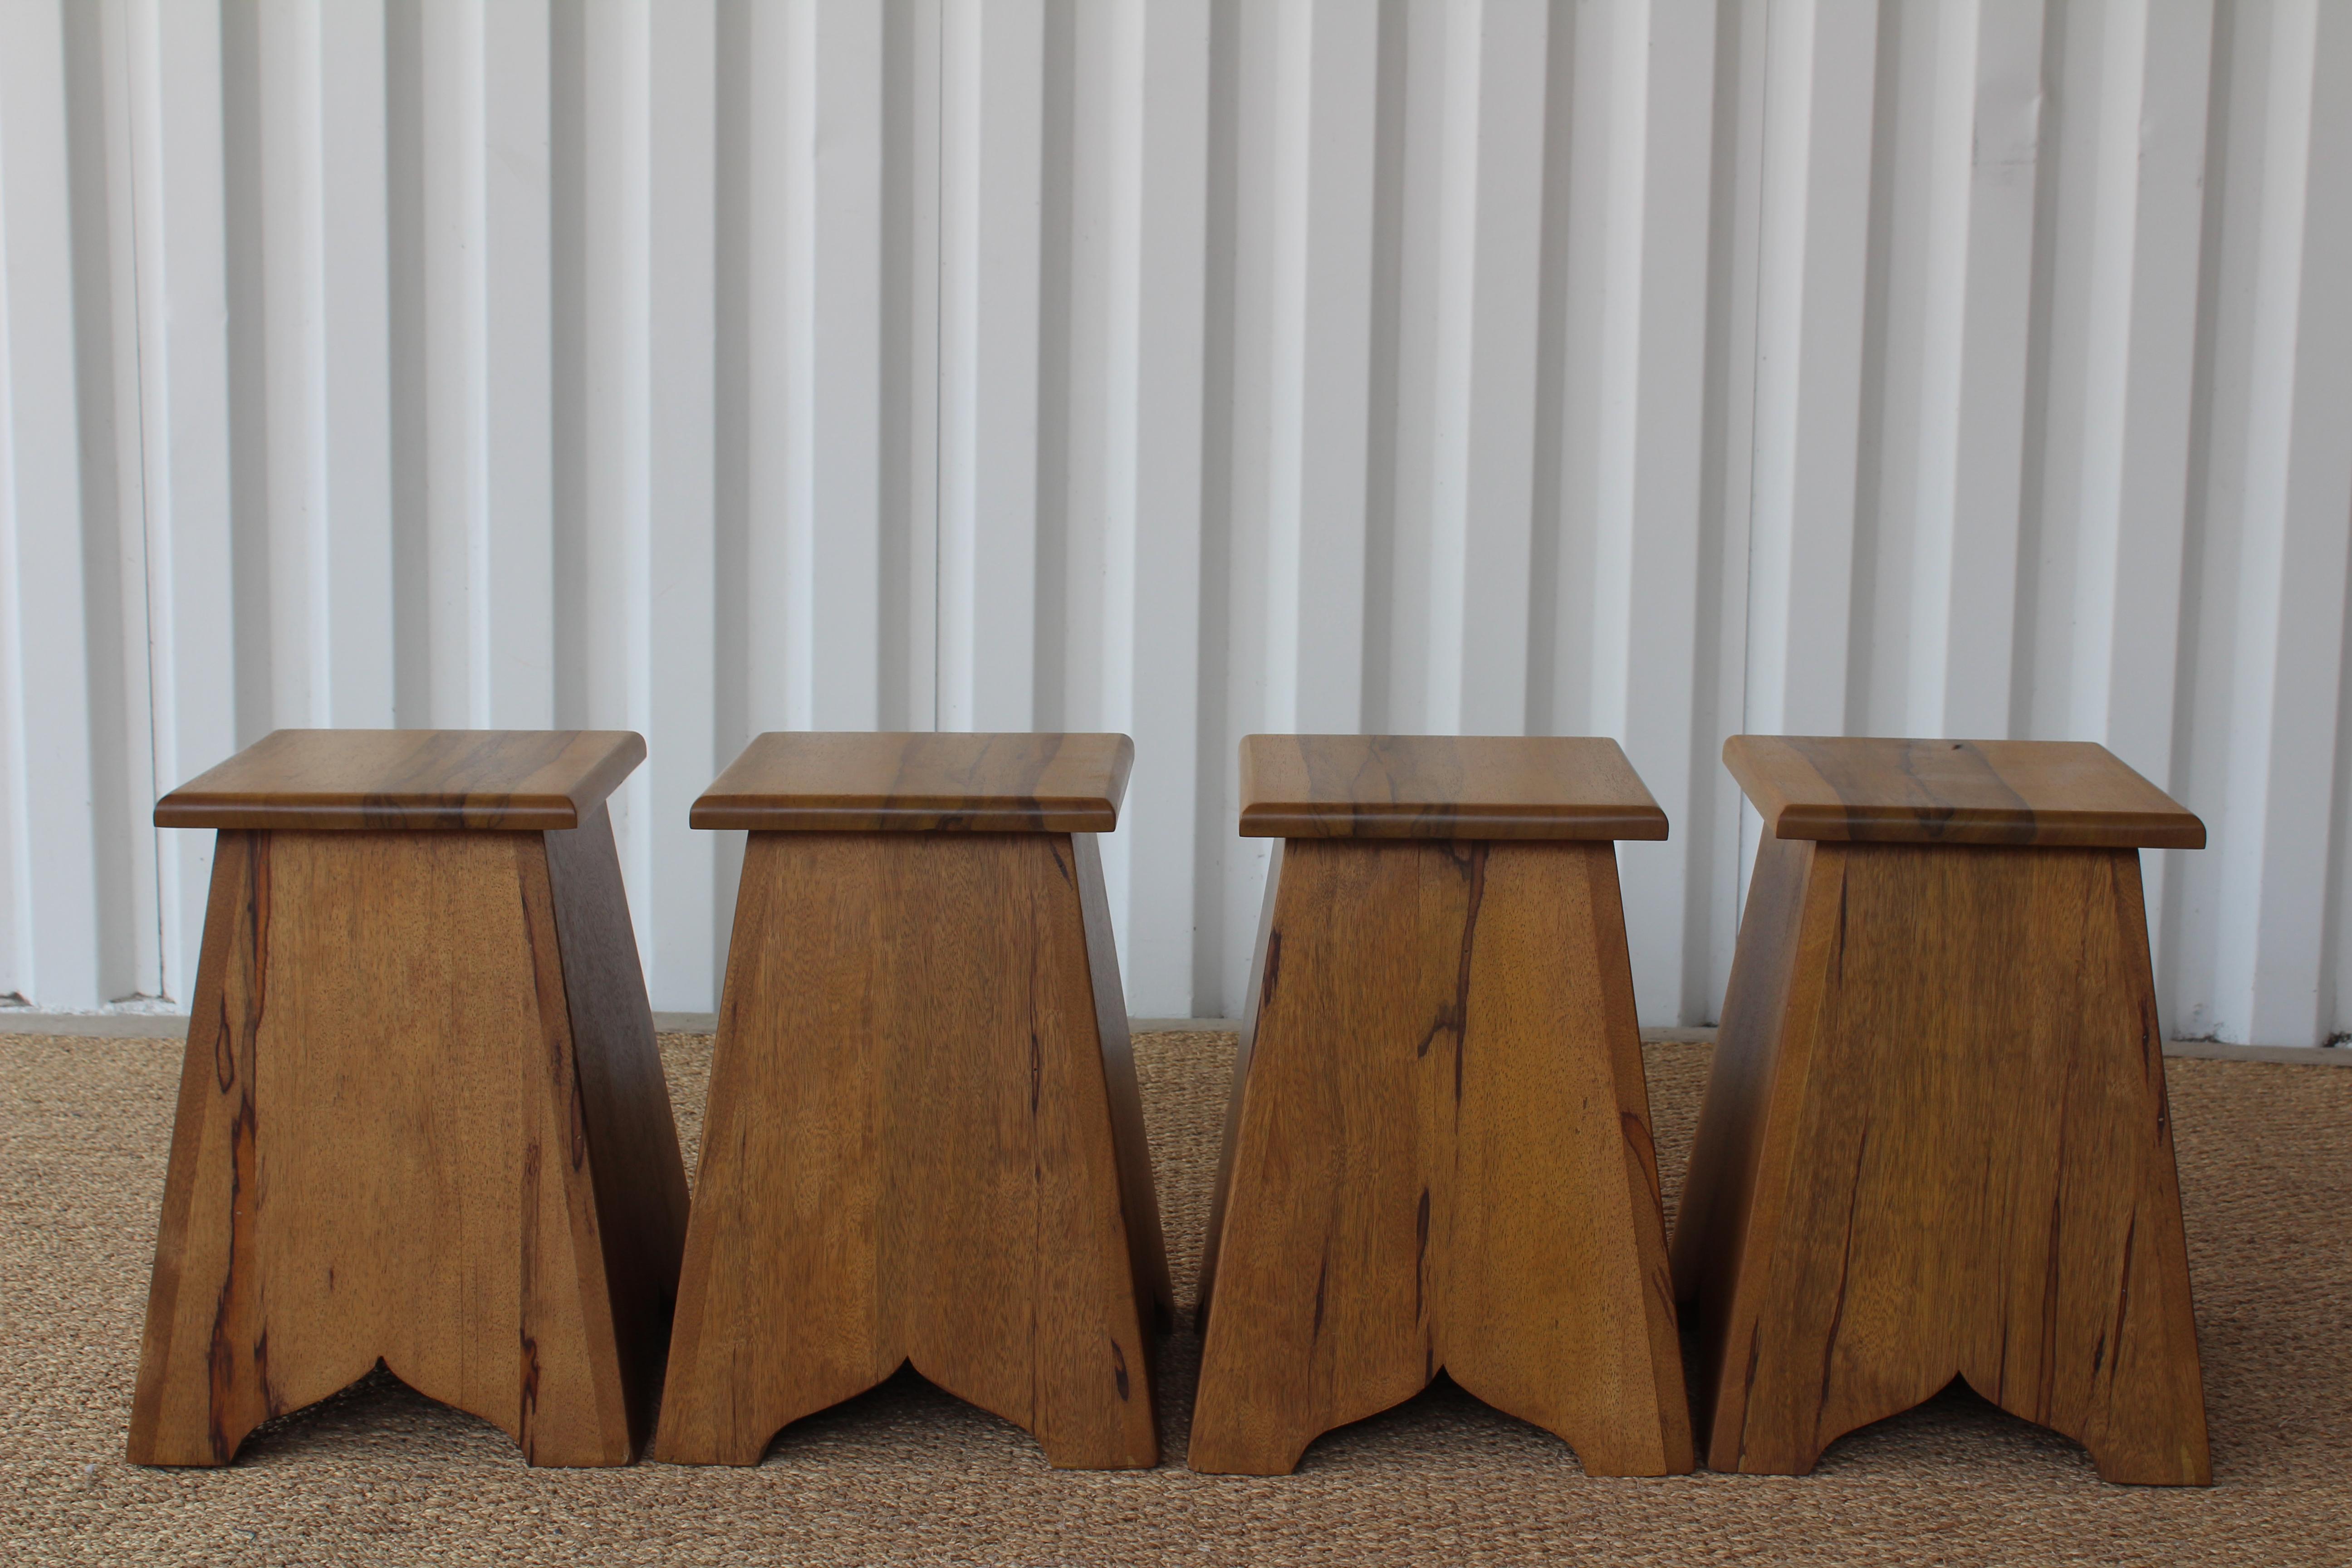 Vintage solid olivewood Moroccan style end tables. Newly refinished. One pair available.